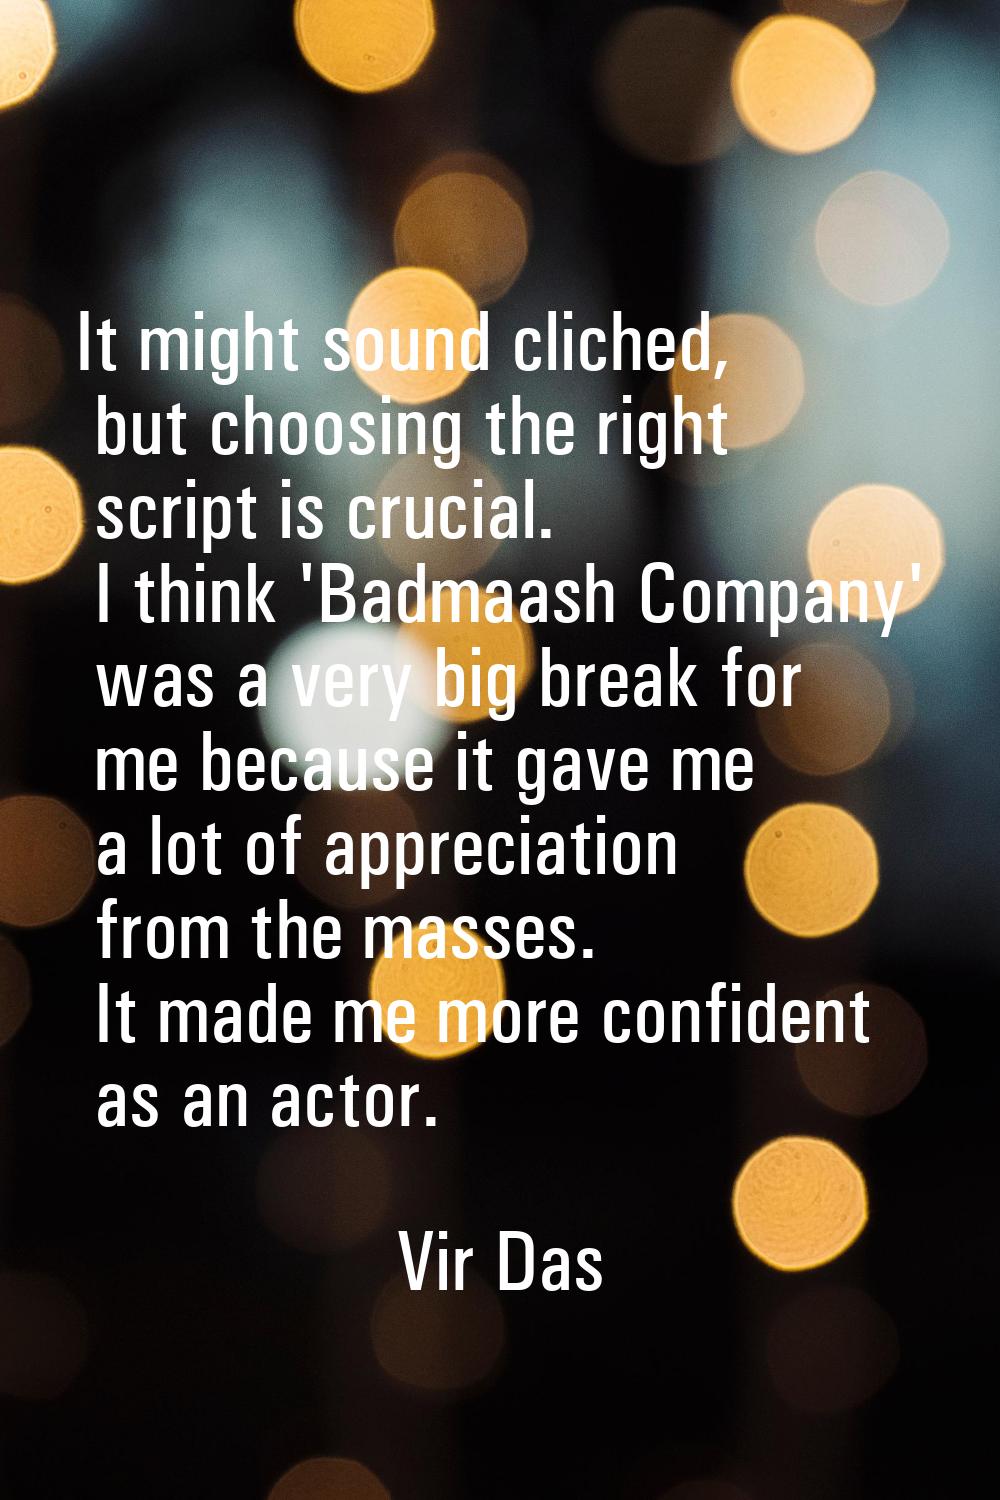 It might sound cliched, but choosing the right script is crucial. I think 'Badmaash Company' was a 